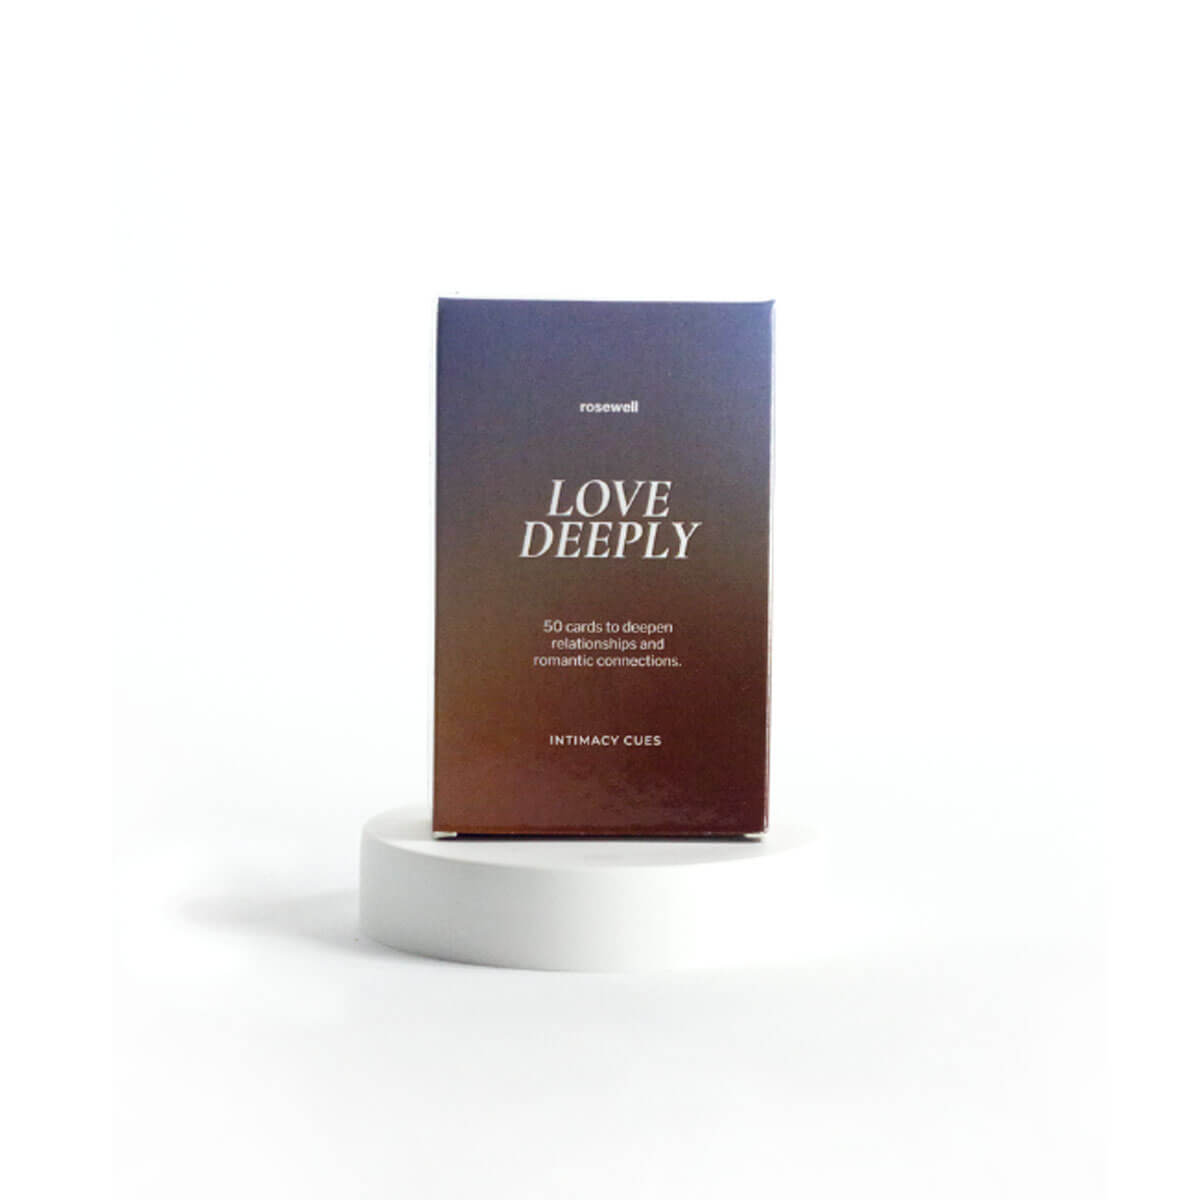 Deck of Rosewell Love Deeply cards on white stand with a blue and brown packaging Nudie Co